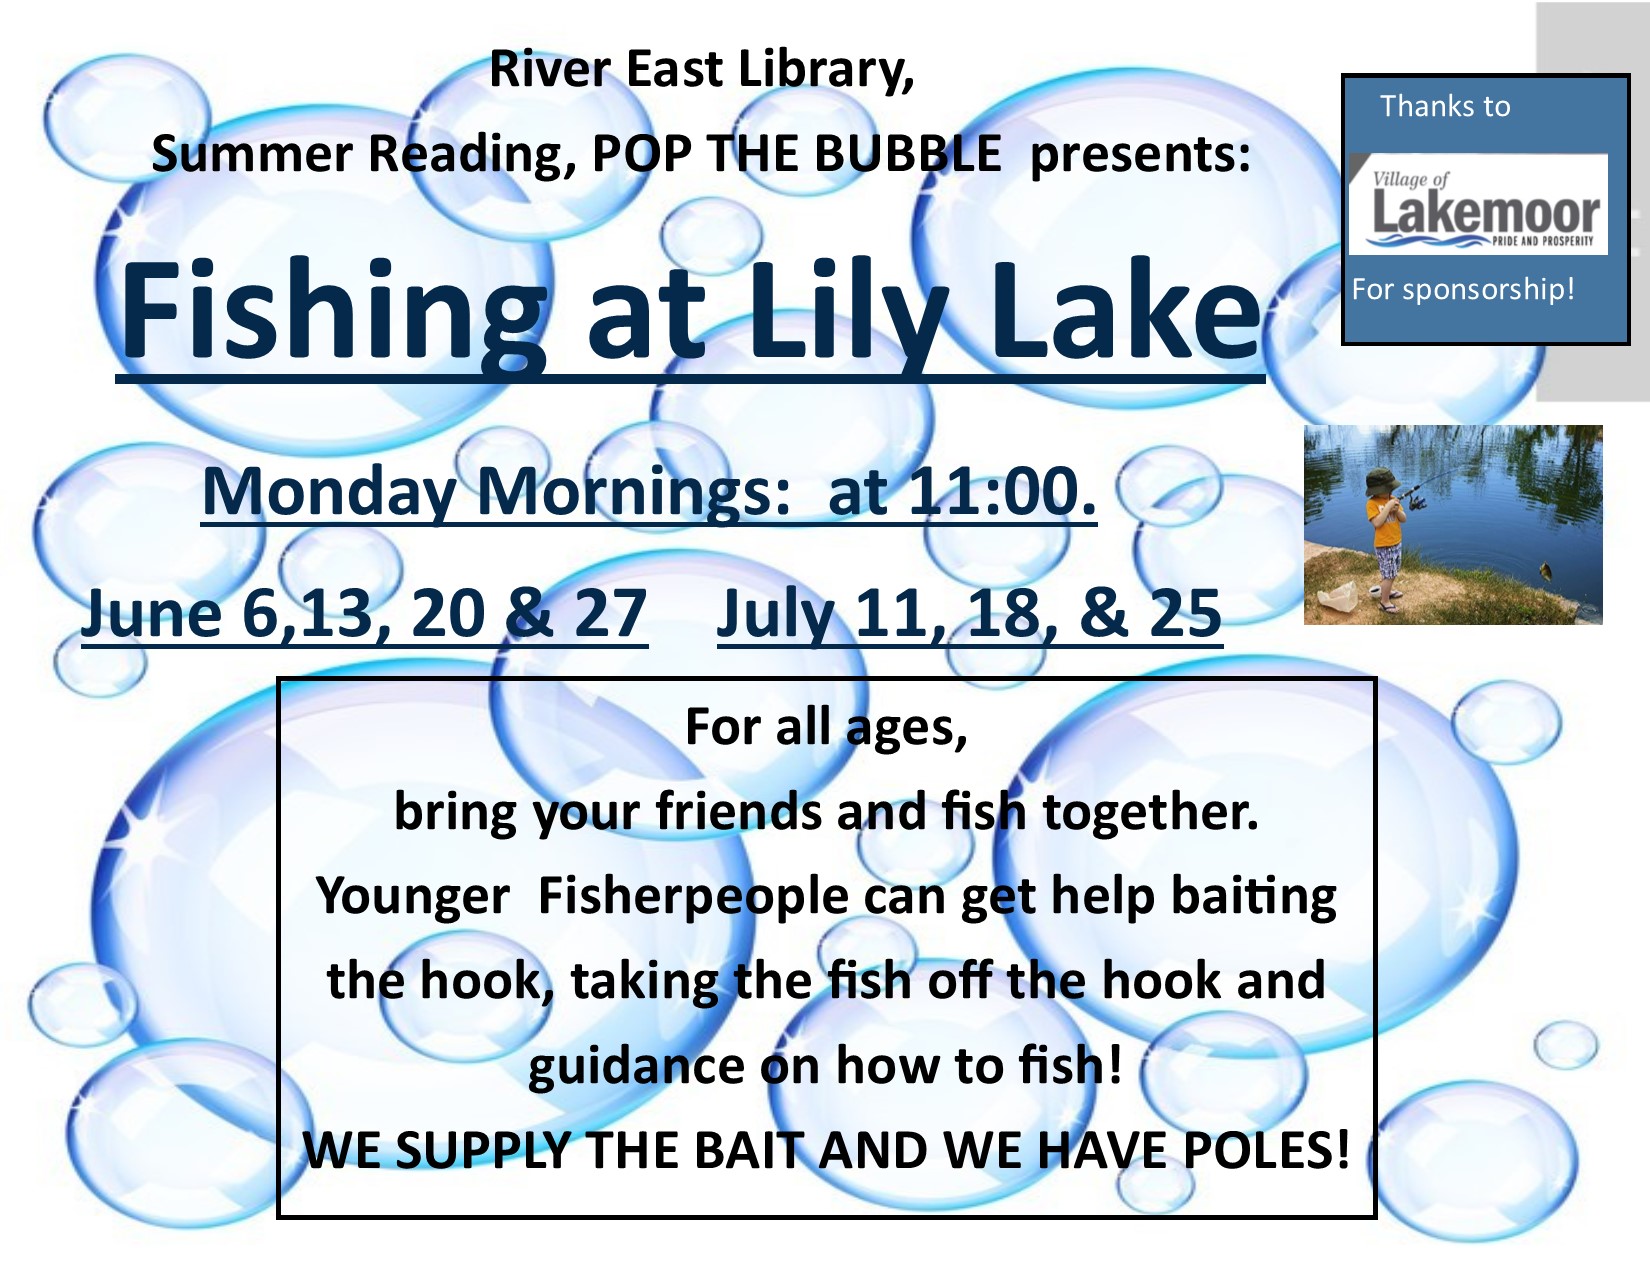 Poster for River East's fishing days at Lily Lake